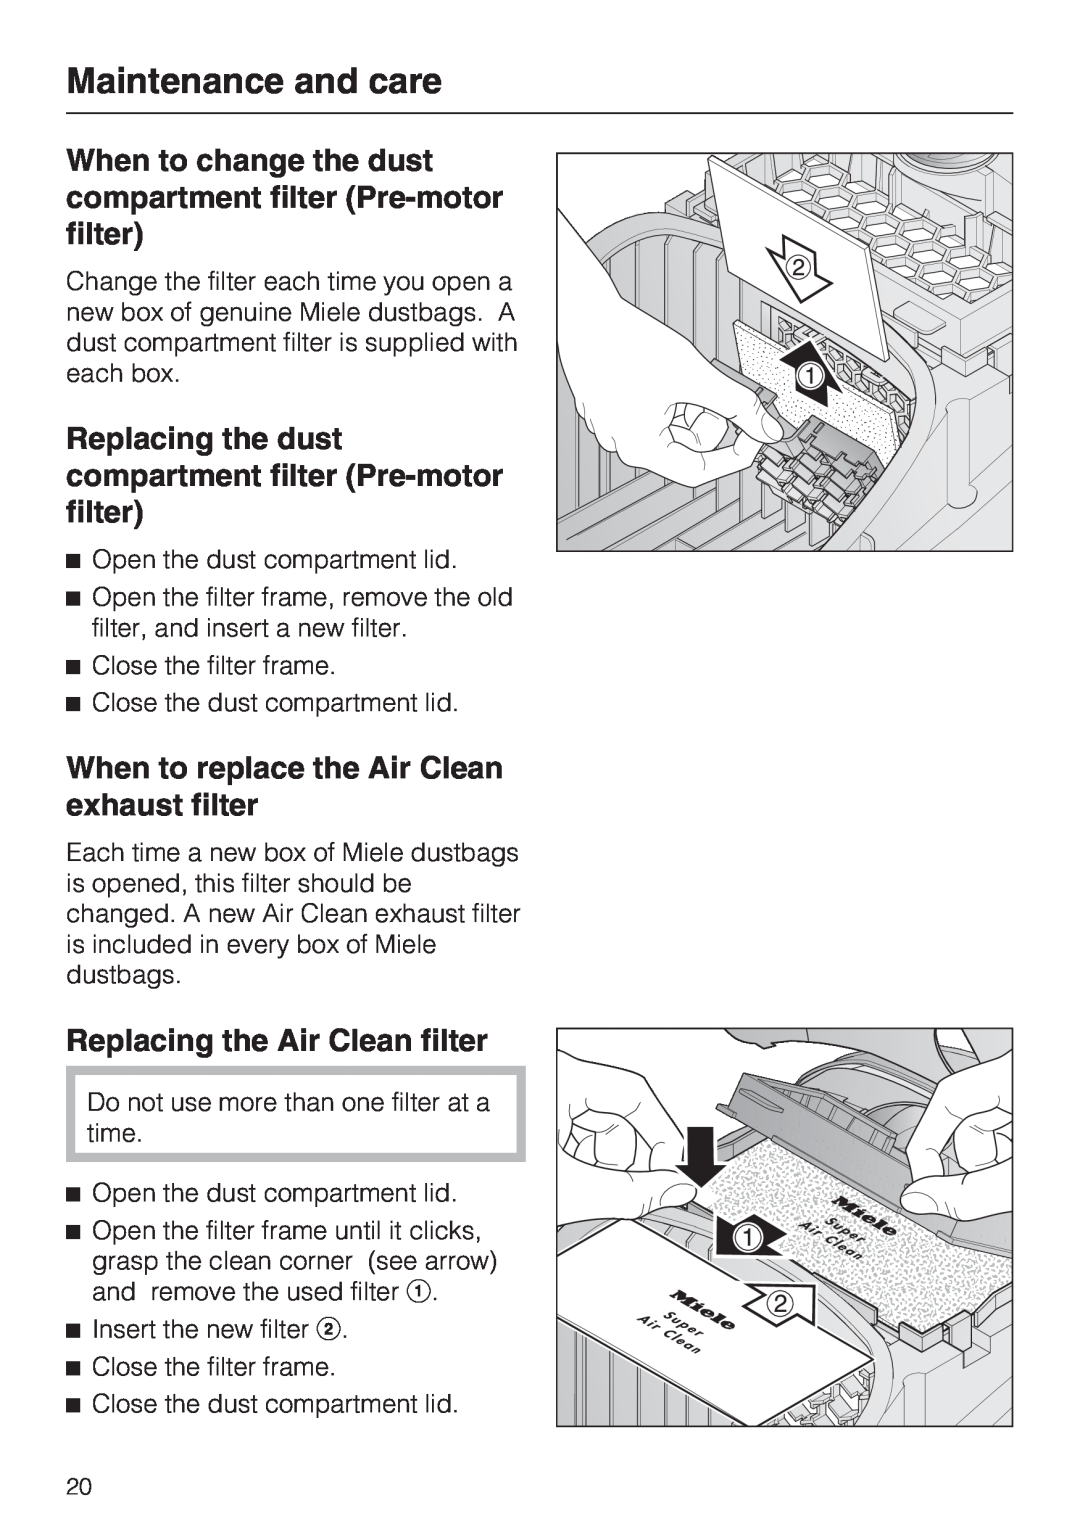 Miele S 2000 When to replace the Air Clean exhaust filter, Replacing the Air Clean filter, Maintenance and care 